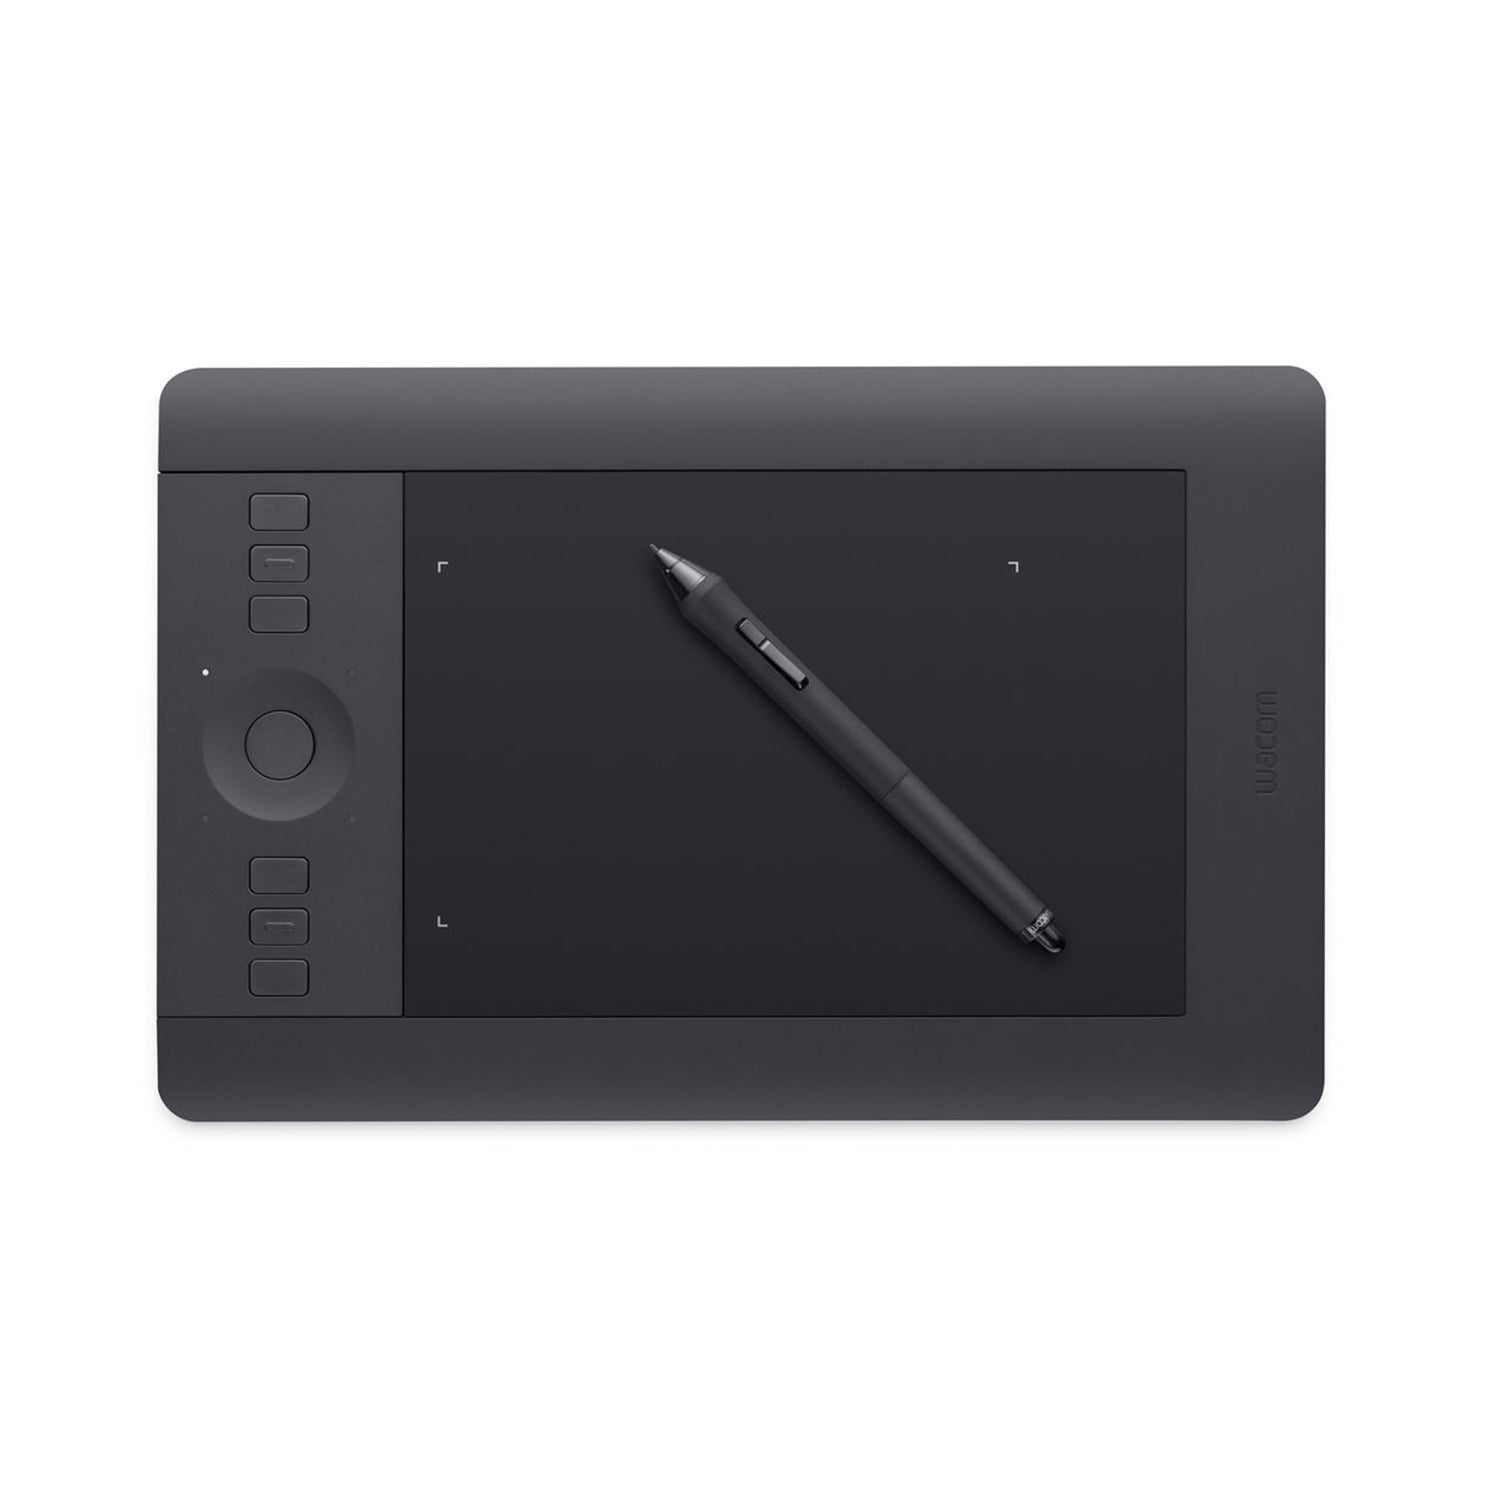 Wacom PTH-451 Intuos Pro Professional Pen & Touch Tablet